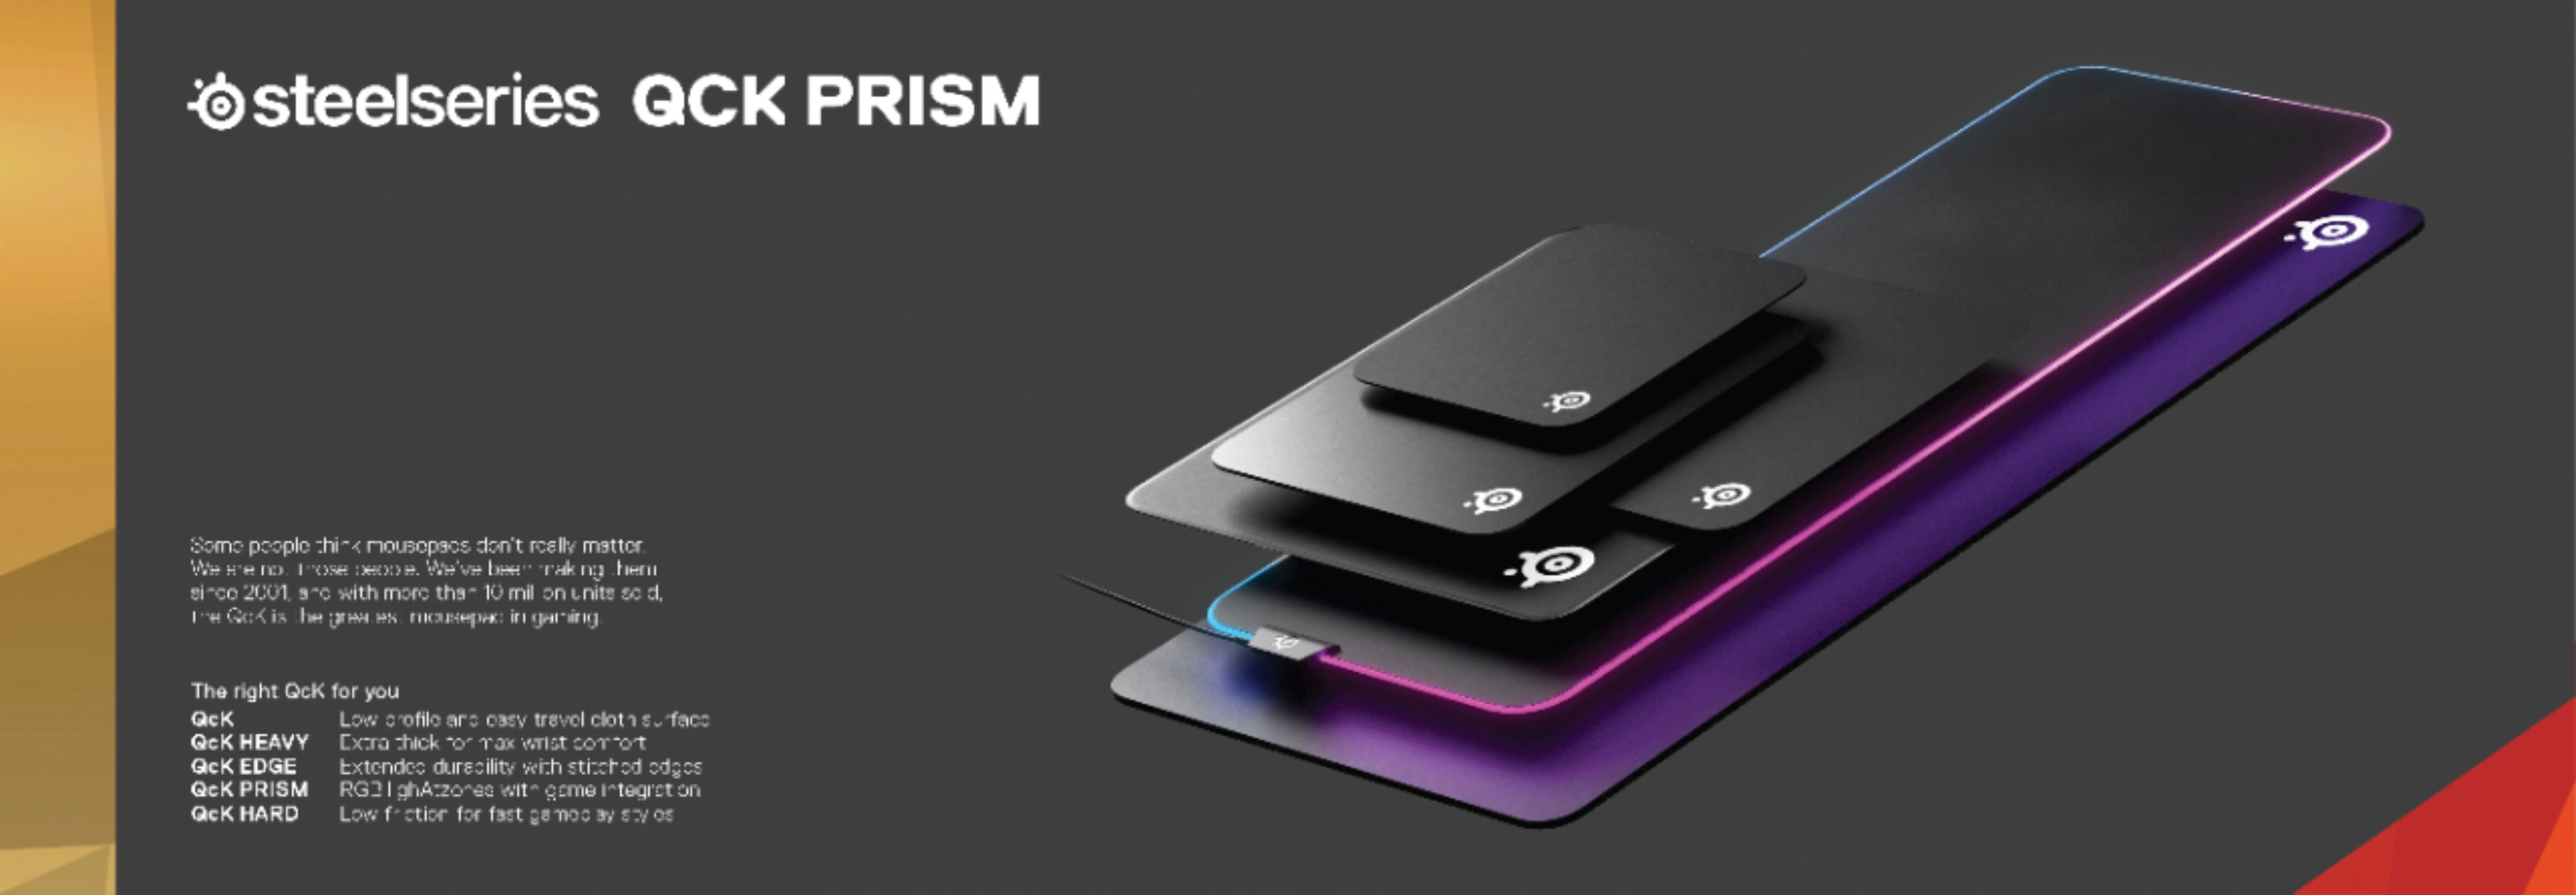 Personal Computer Center - SteelSeries QcK Prism Cloth RGB Gaming Mouse Pad  XL, Brilliant illumination, Game Alerts, Audio Visualiser, Discord  Notifications, NON Slip Rubber Base, Mouse Accuracy, Smooth Surface,  900x300x4mm, 63826 20.000